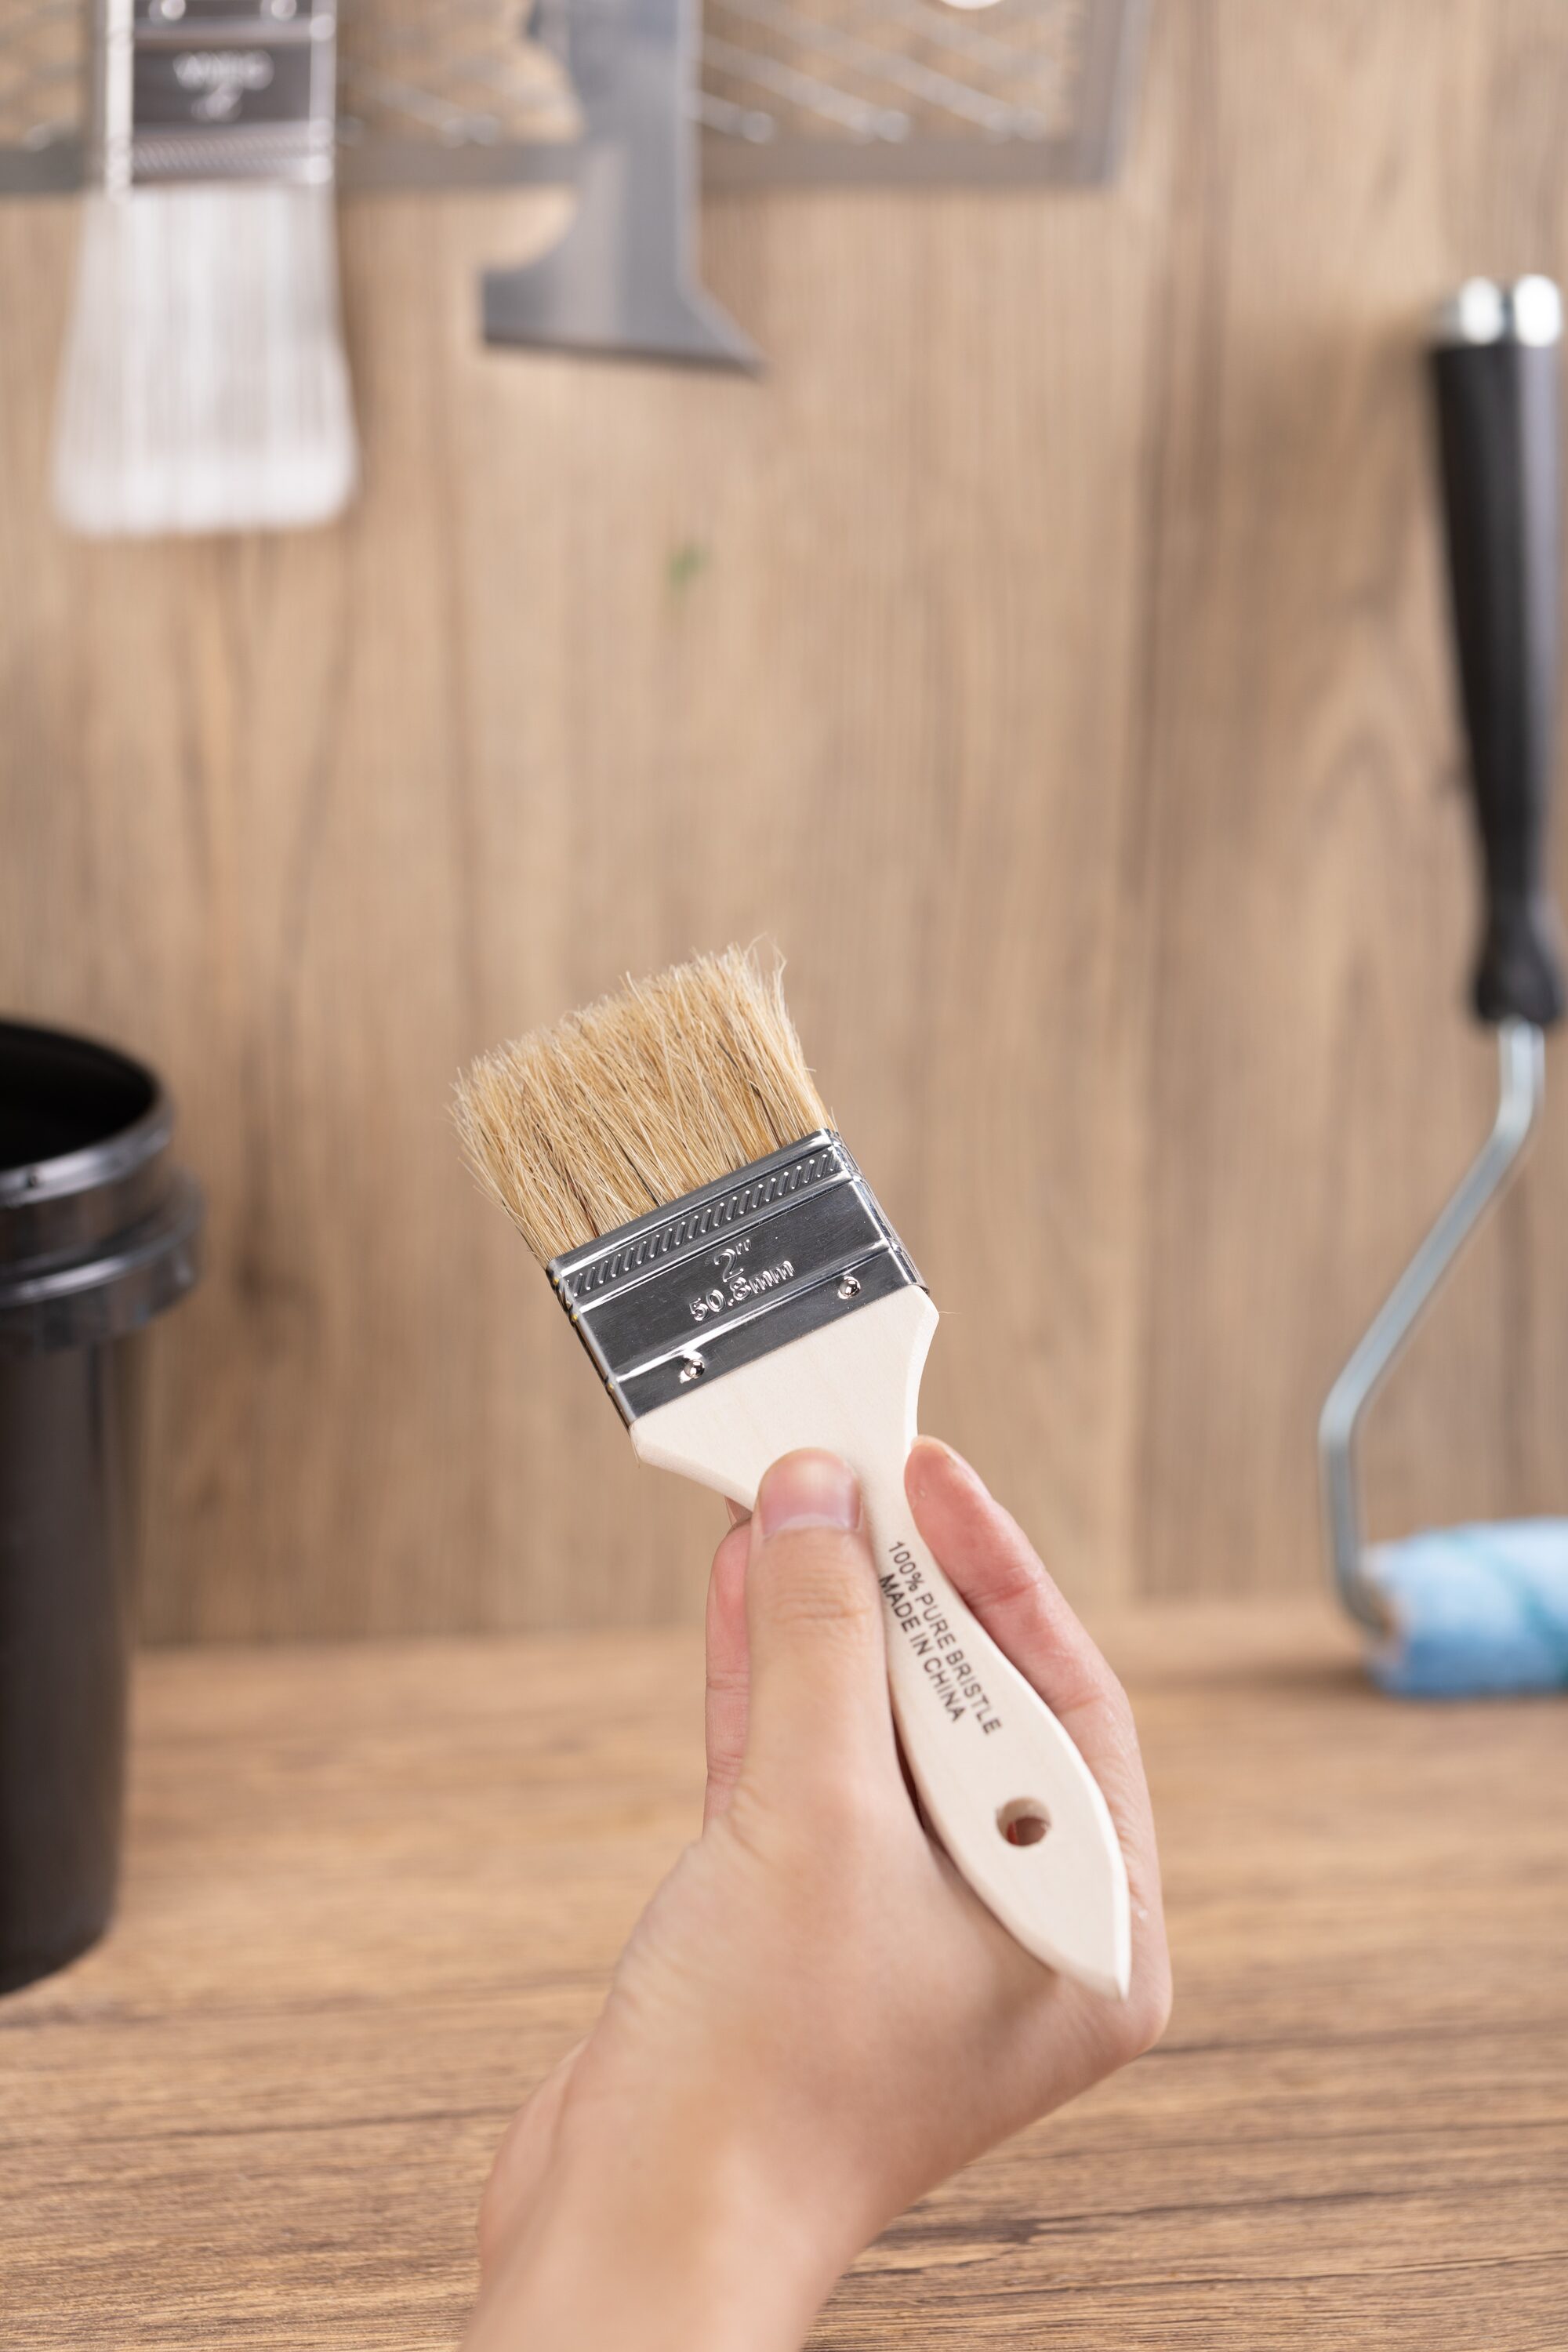 Project Source 3-in Natural Bristle Flat Paint Brush (Chip Brush) | 2200530